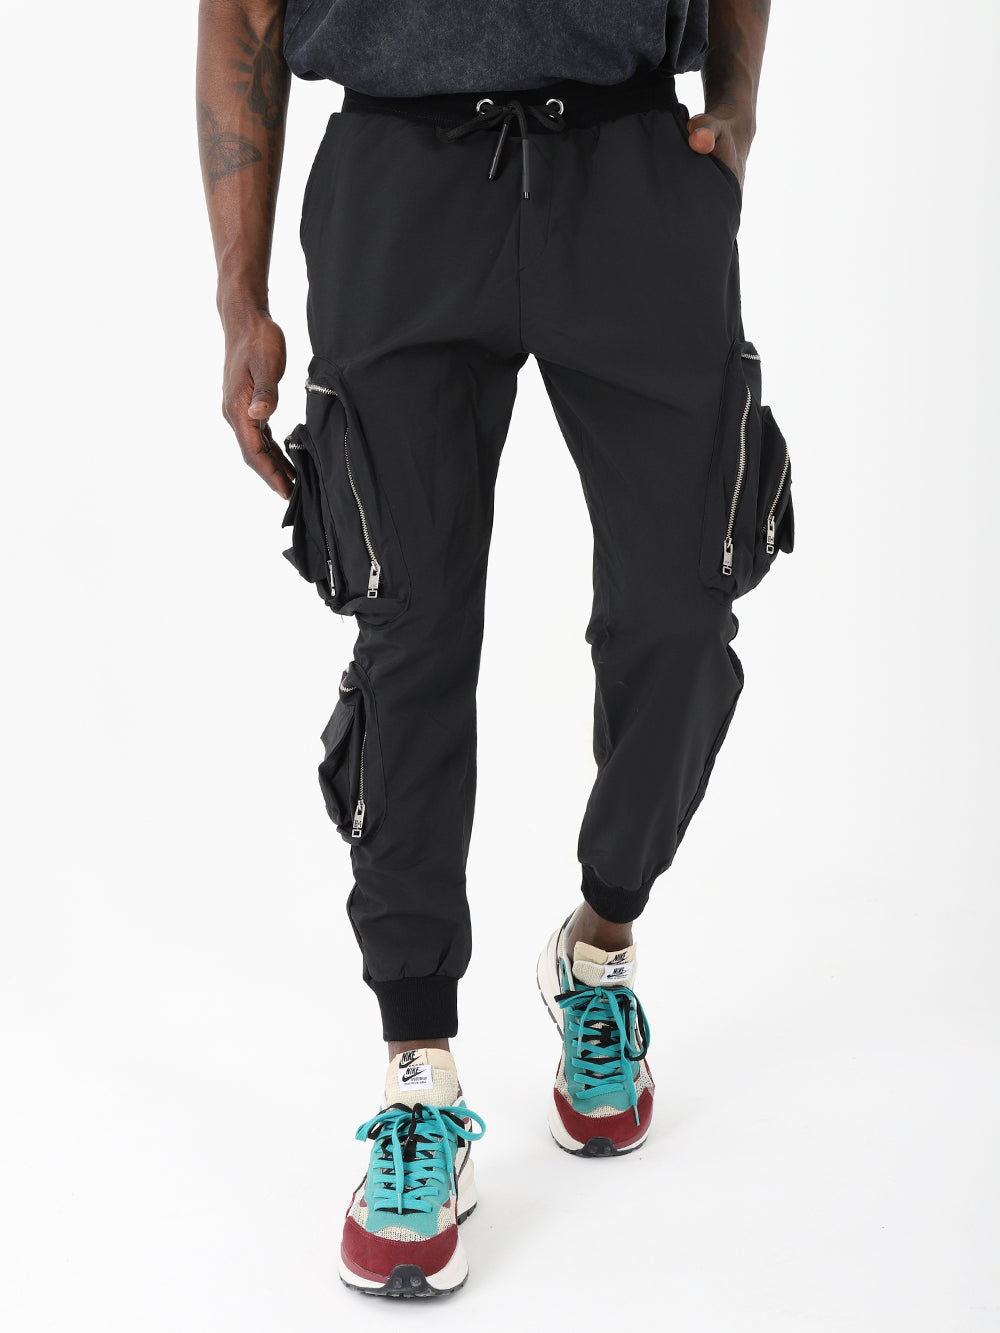 A man wearing LAVANO JOGGERS and sneakers.